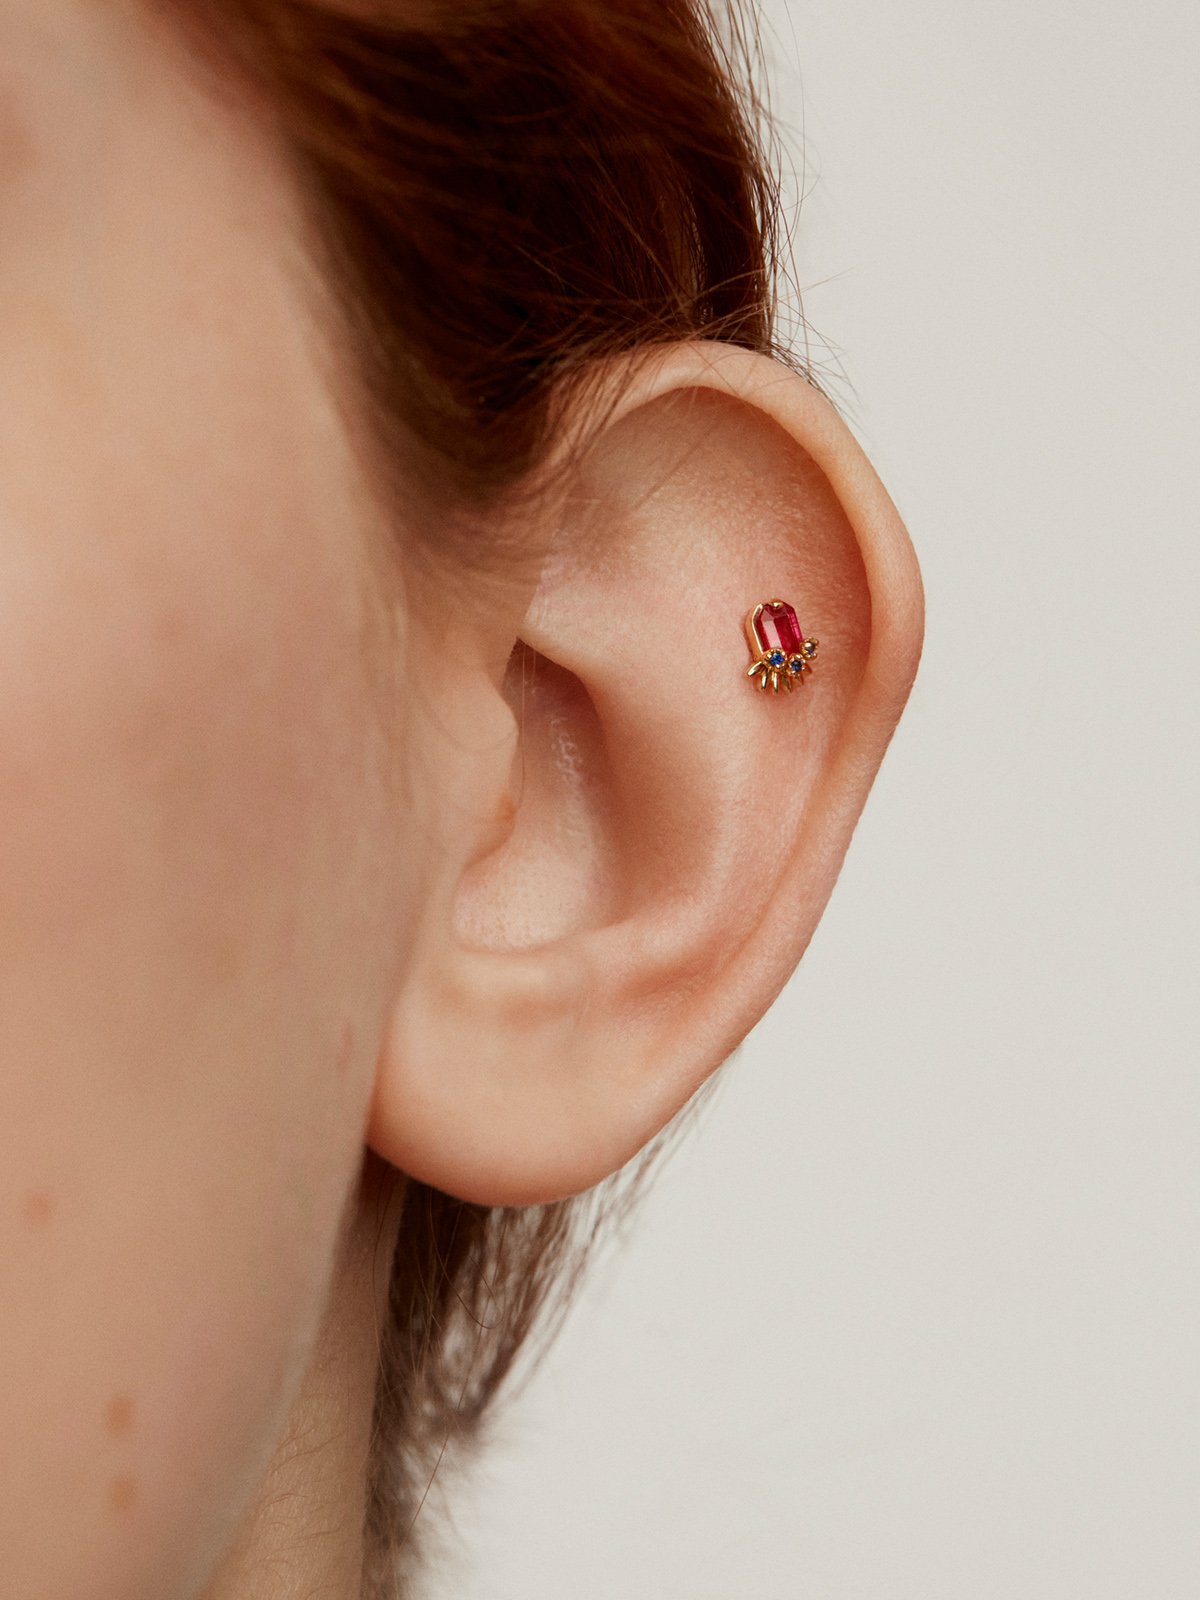 18K Yellow gold piercing with ruby and blue sapphires.